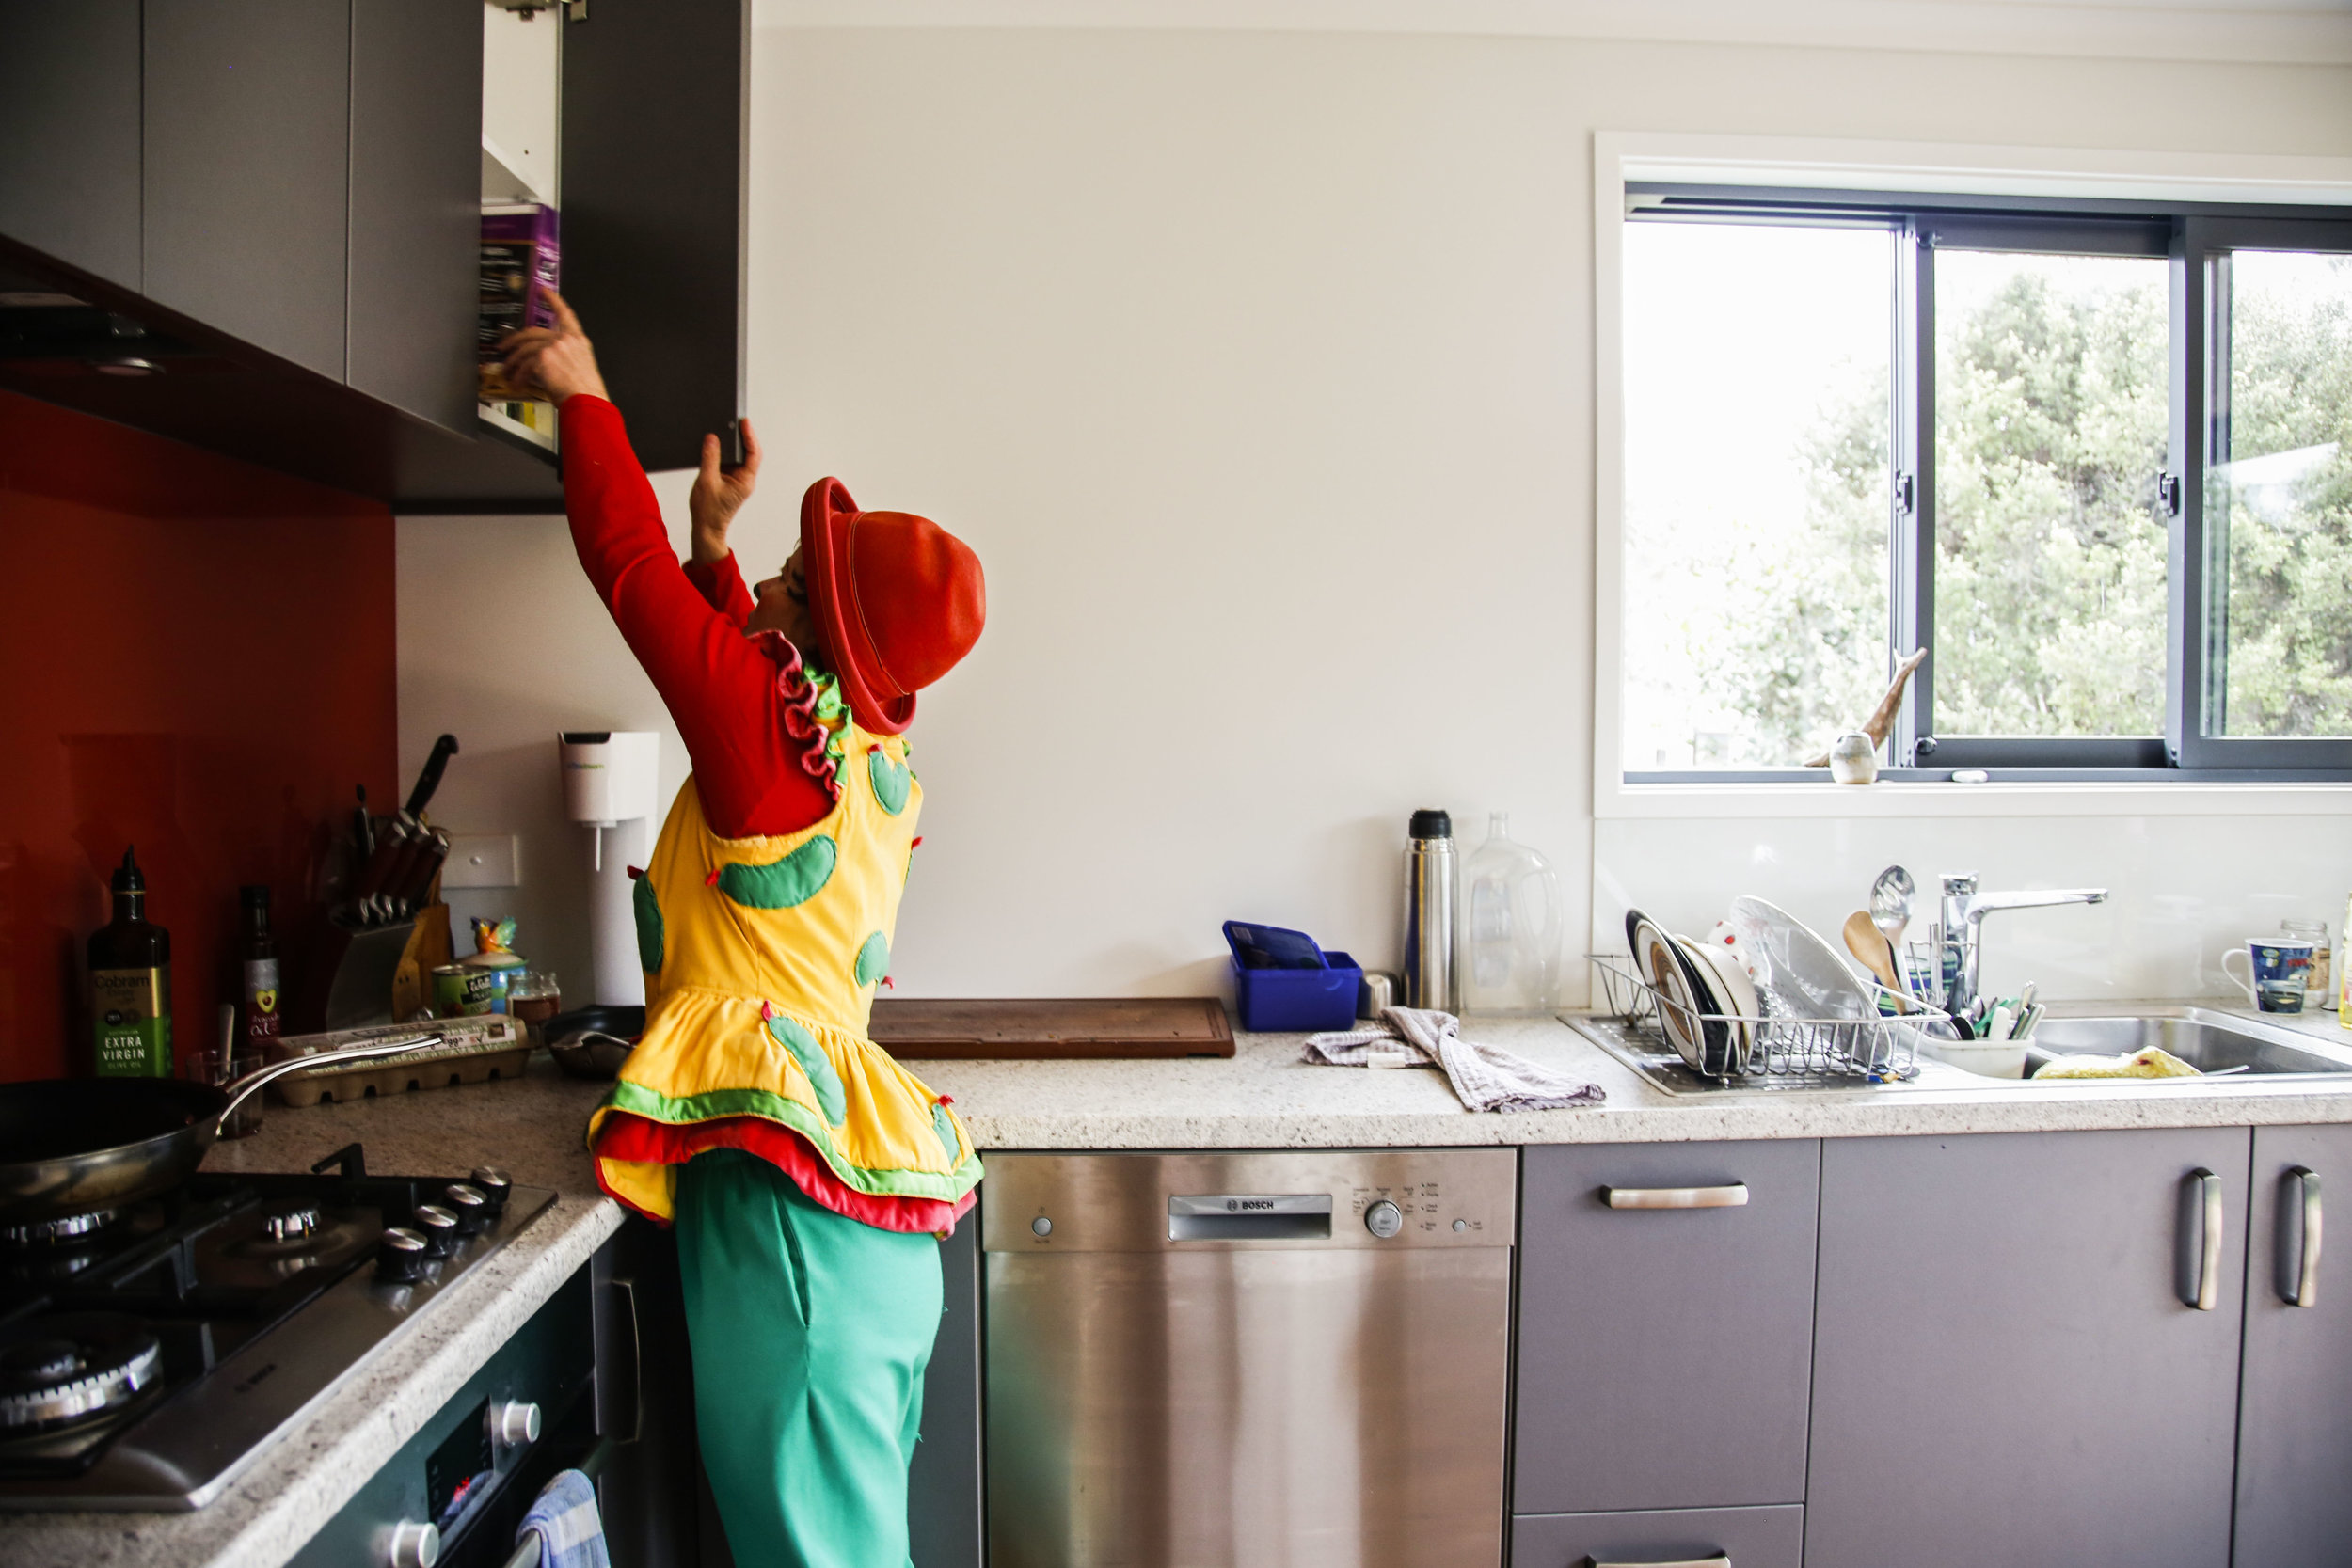  Lisa goes through her kitchen cupboard in her newly remodeled Christchurch, NZ home.&nbsp; 